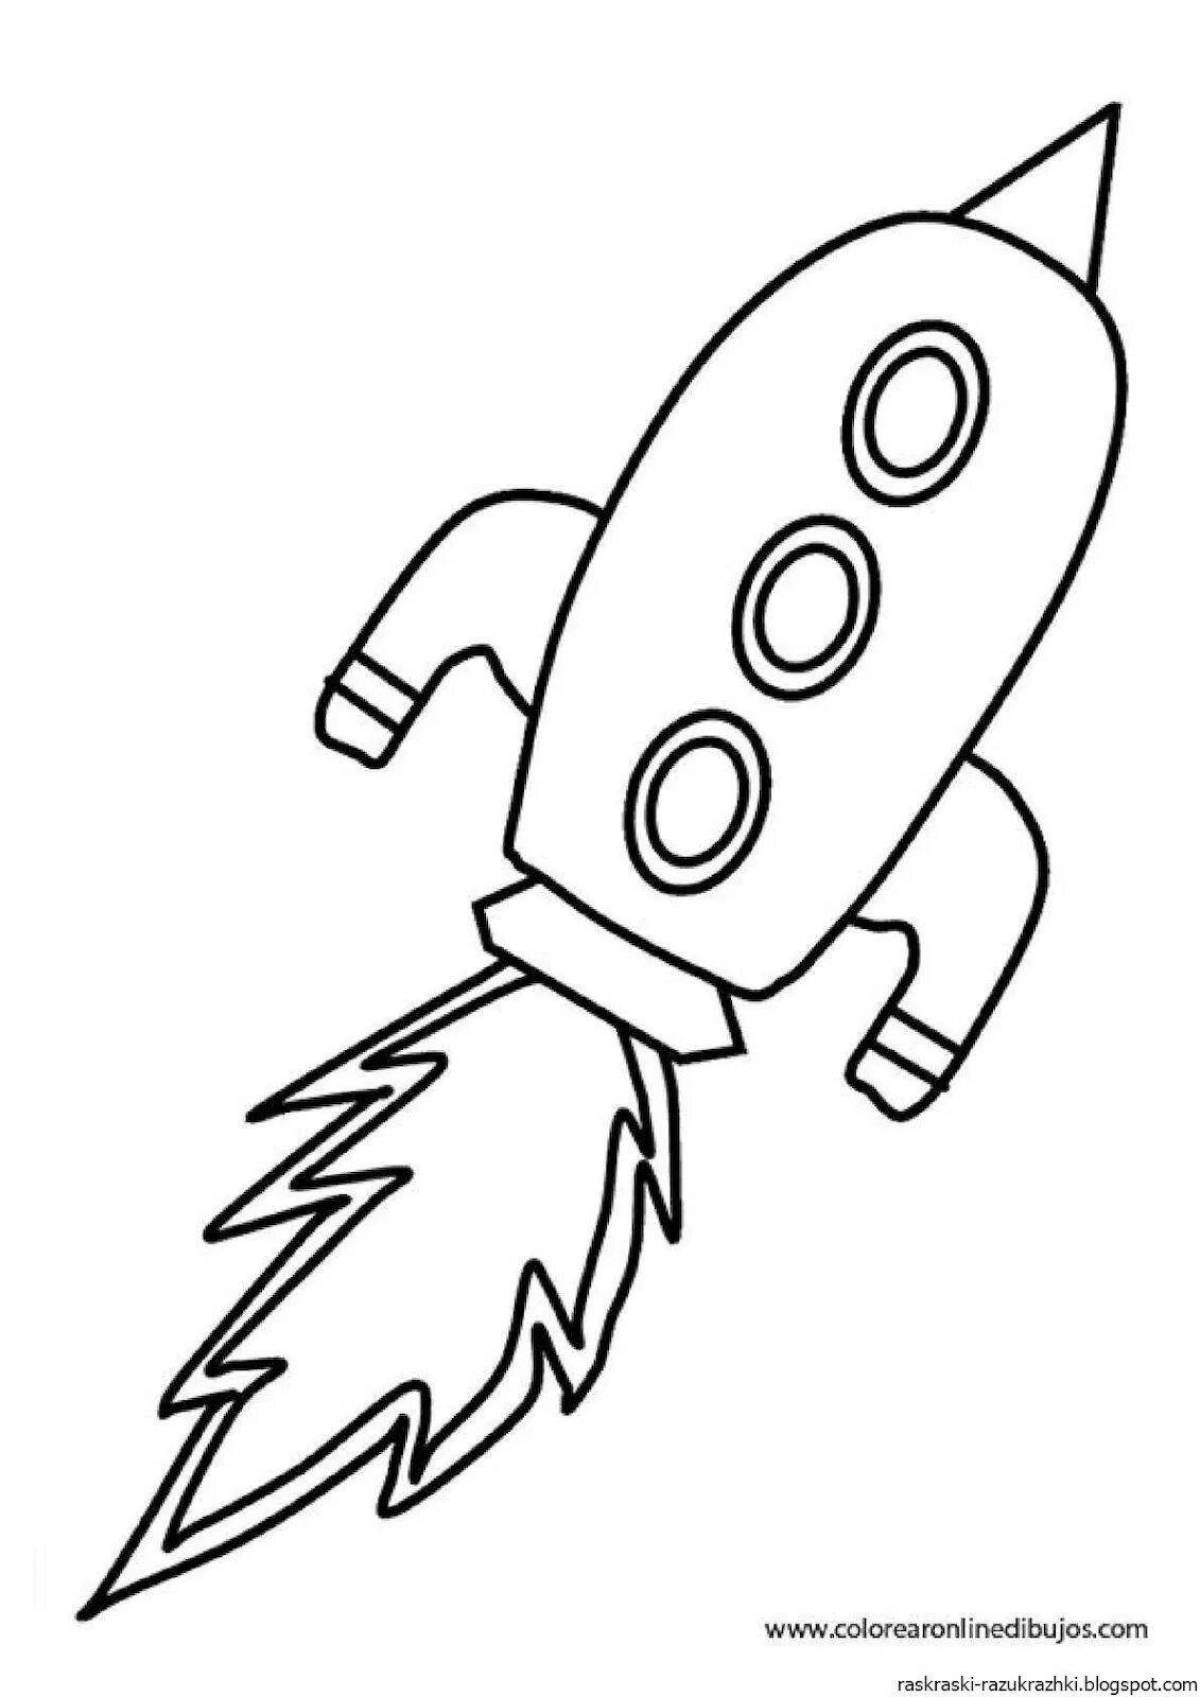 Colored rocket explosion coloring book for children 4-5 years old